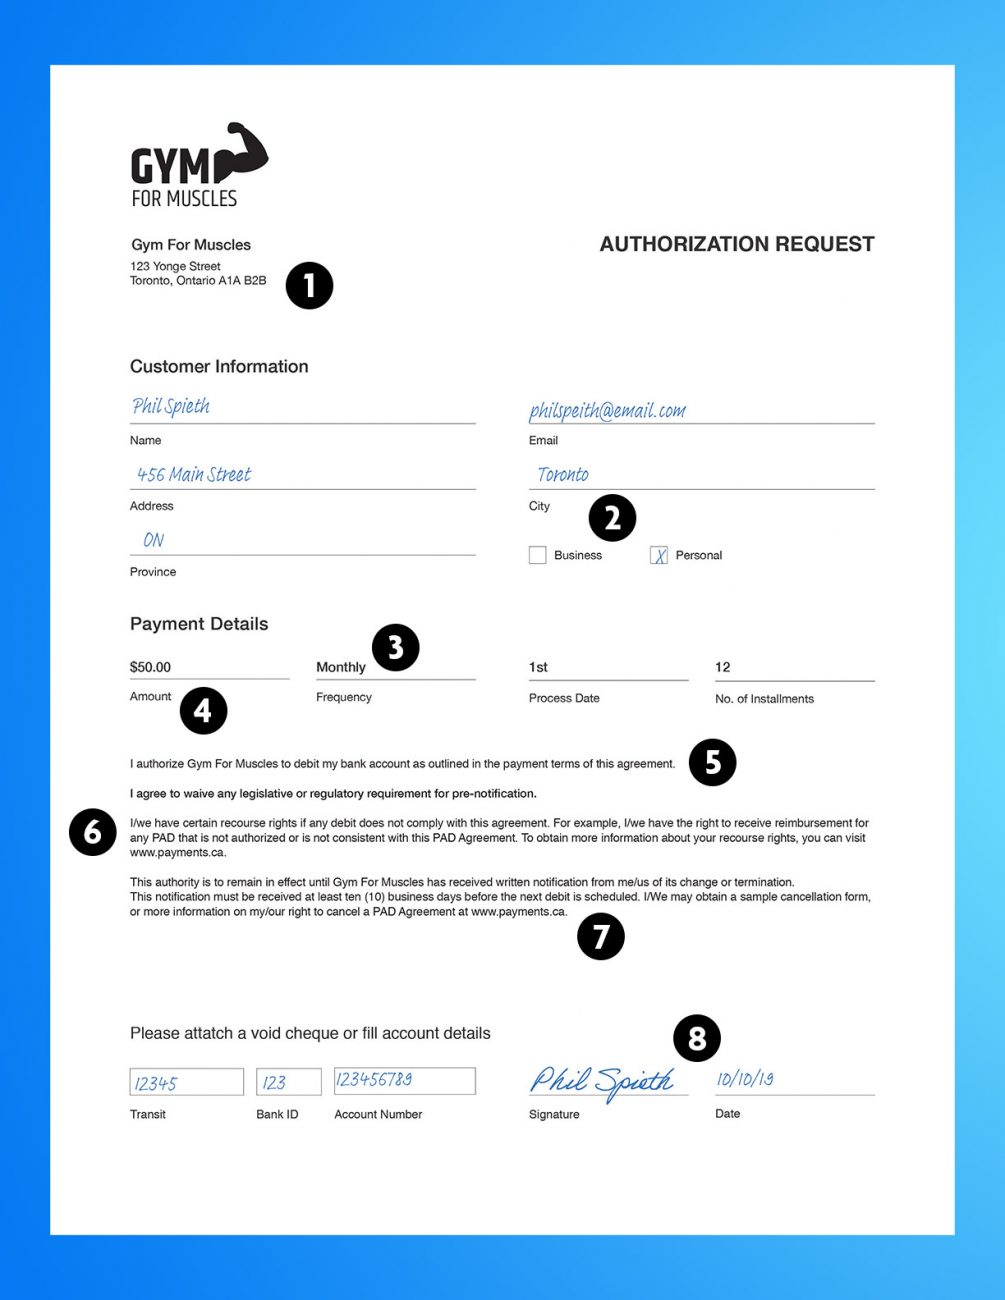 Pe authorized debit form components. All the parts of an authorization request.